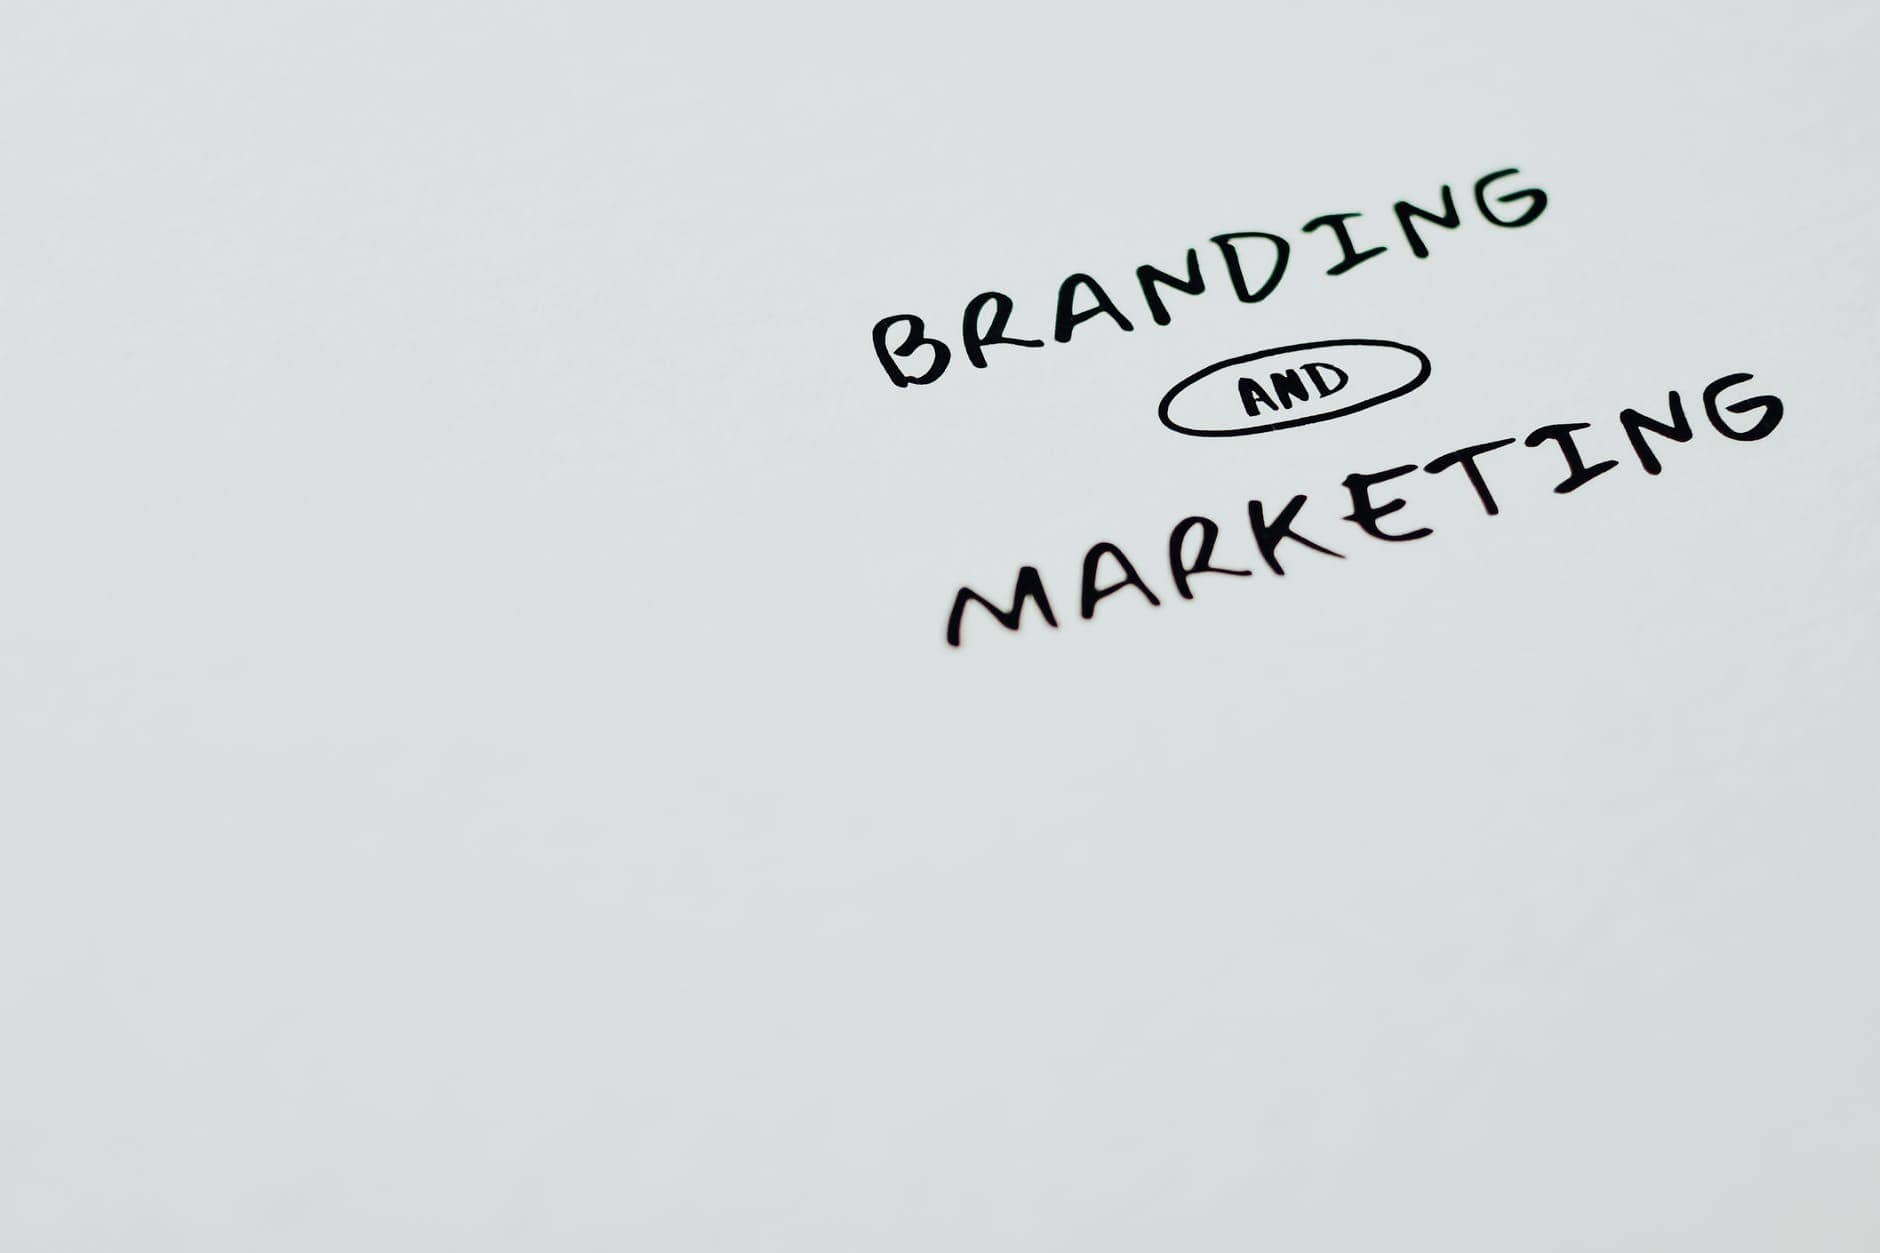 branding and marketing text on a white surface